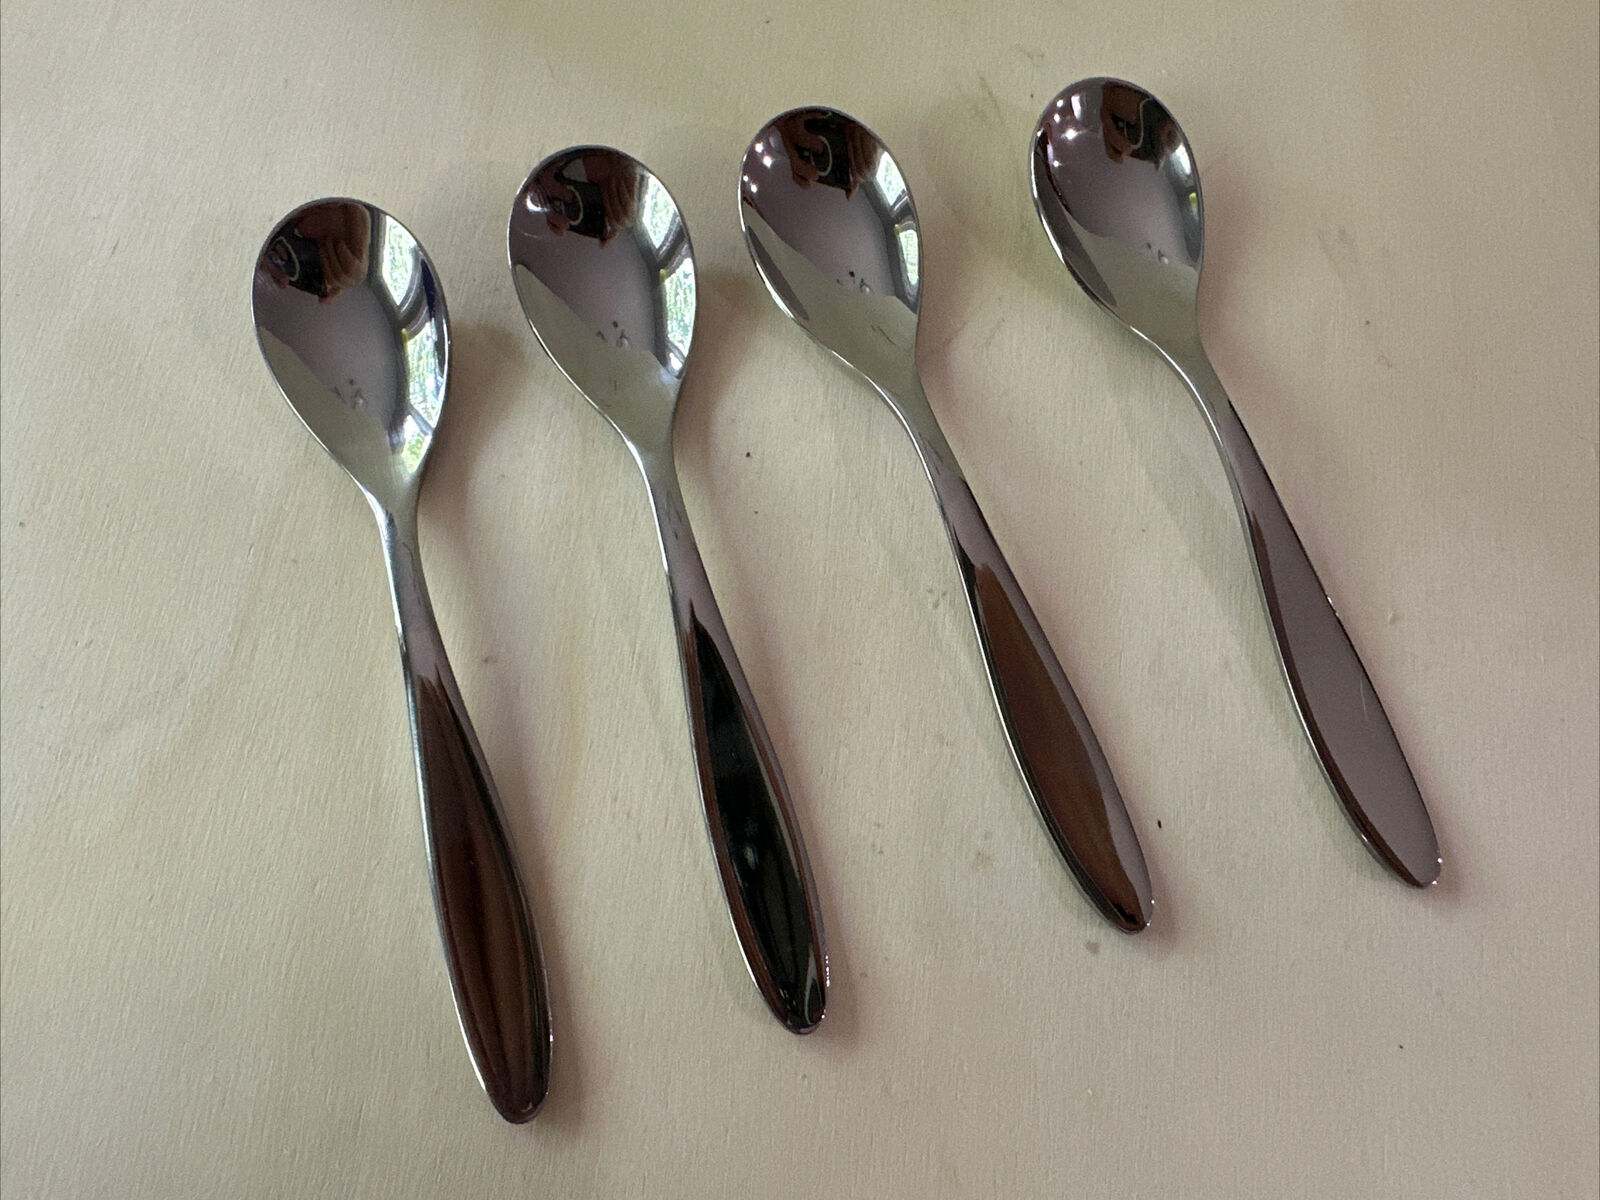 delta airlines alessi spoon Set Of 4